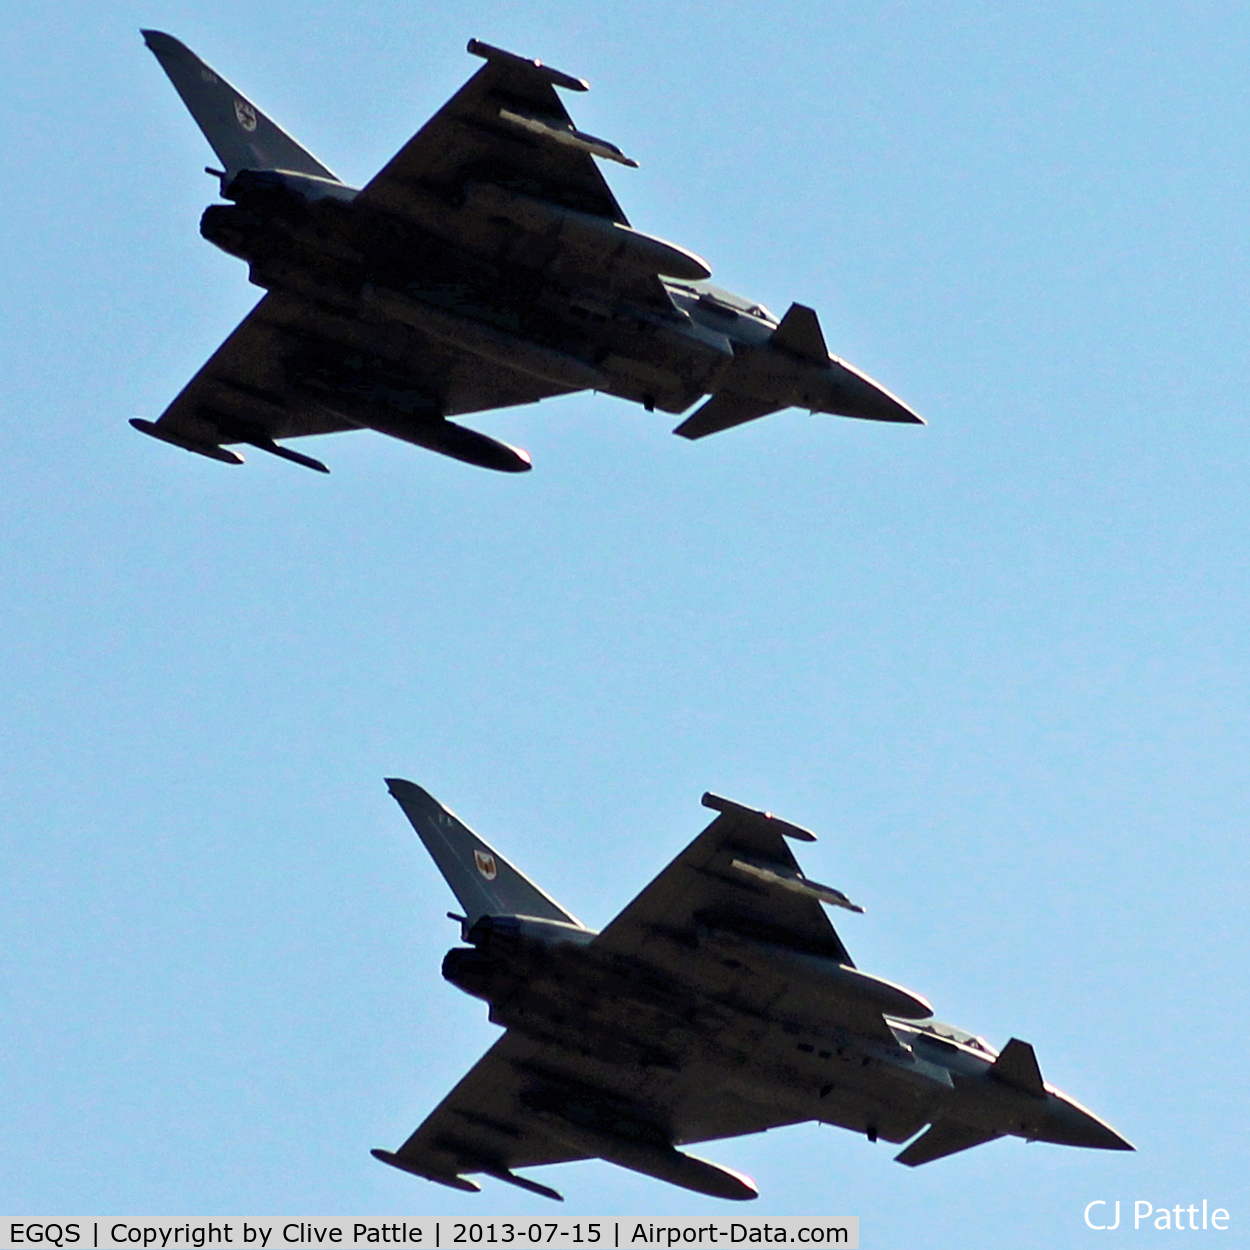 RAF Lossiemouth Airport, Lossiemouth, Scotland United Kingdom (EGQS) - A pair of Typhoon FGR4 aircraft over RAF Lossiemouth prior to landing.